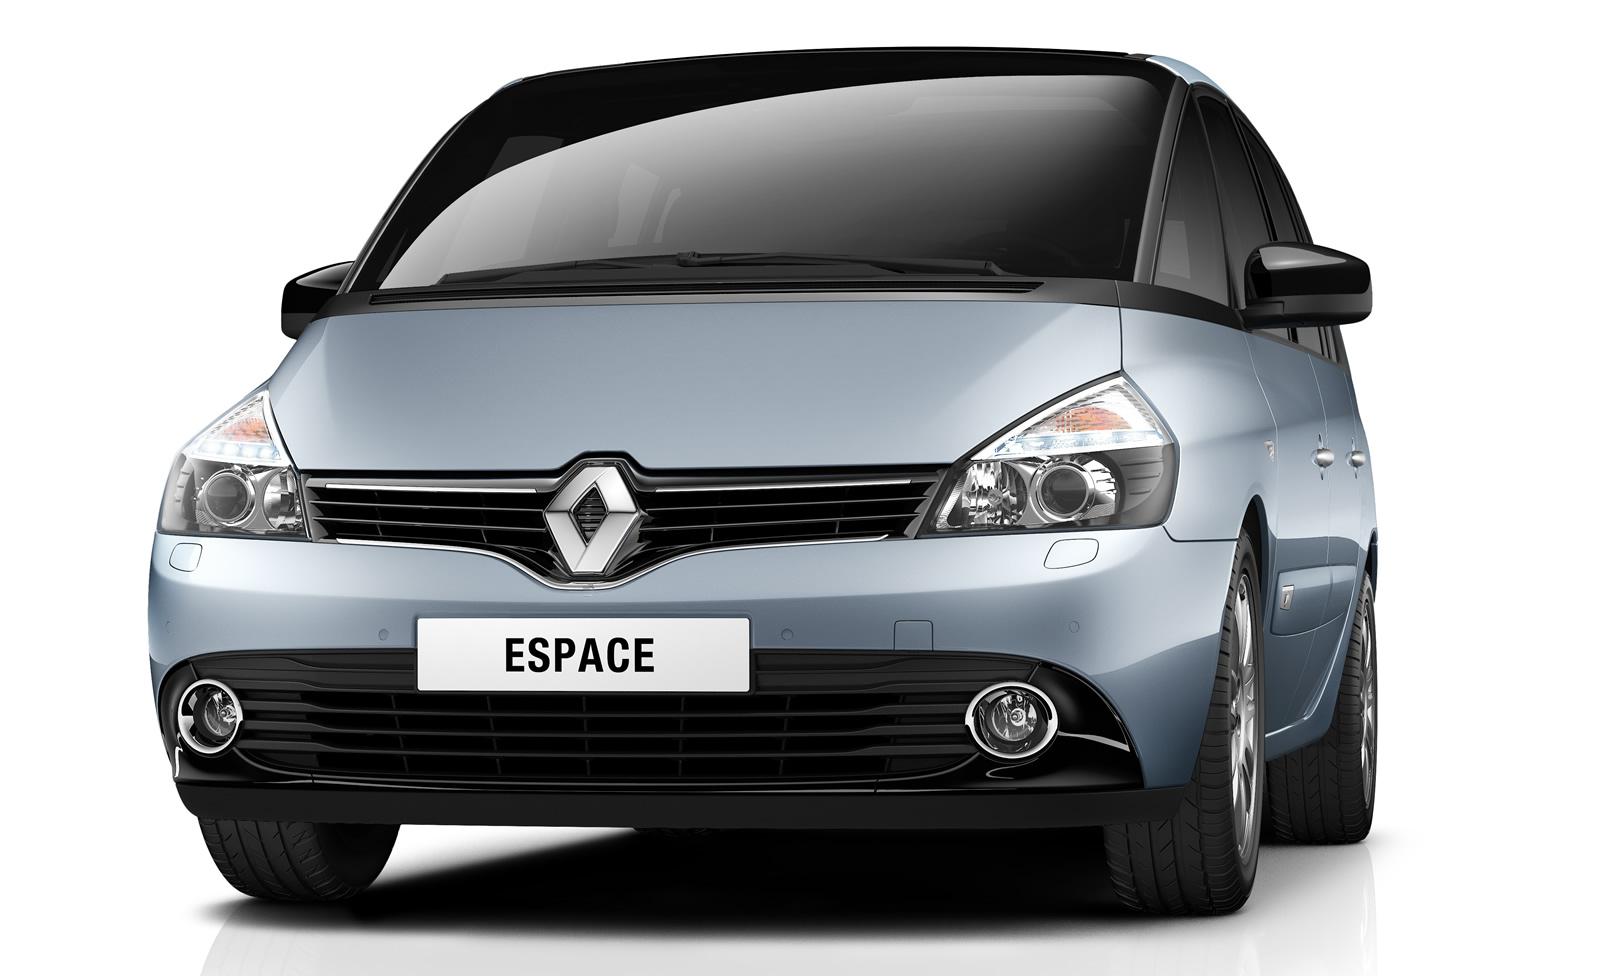 Renault Espace restyling 2012